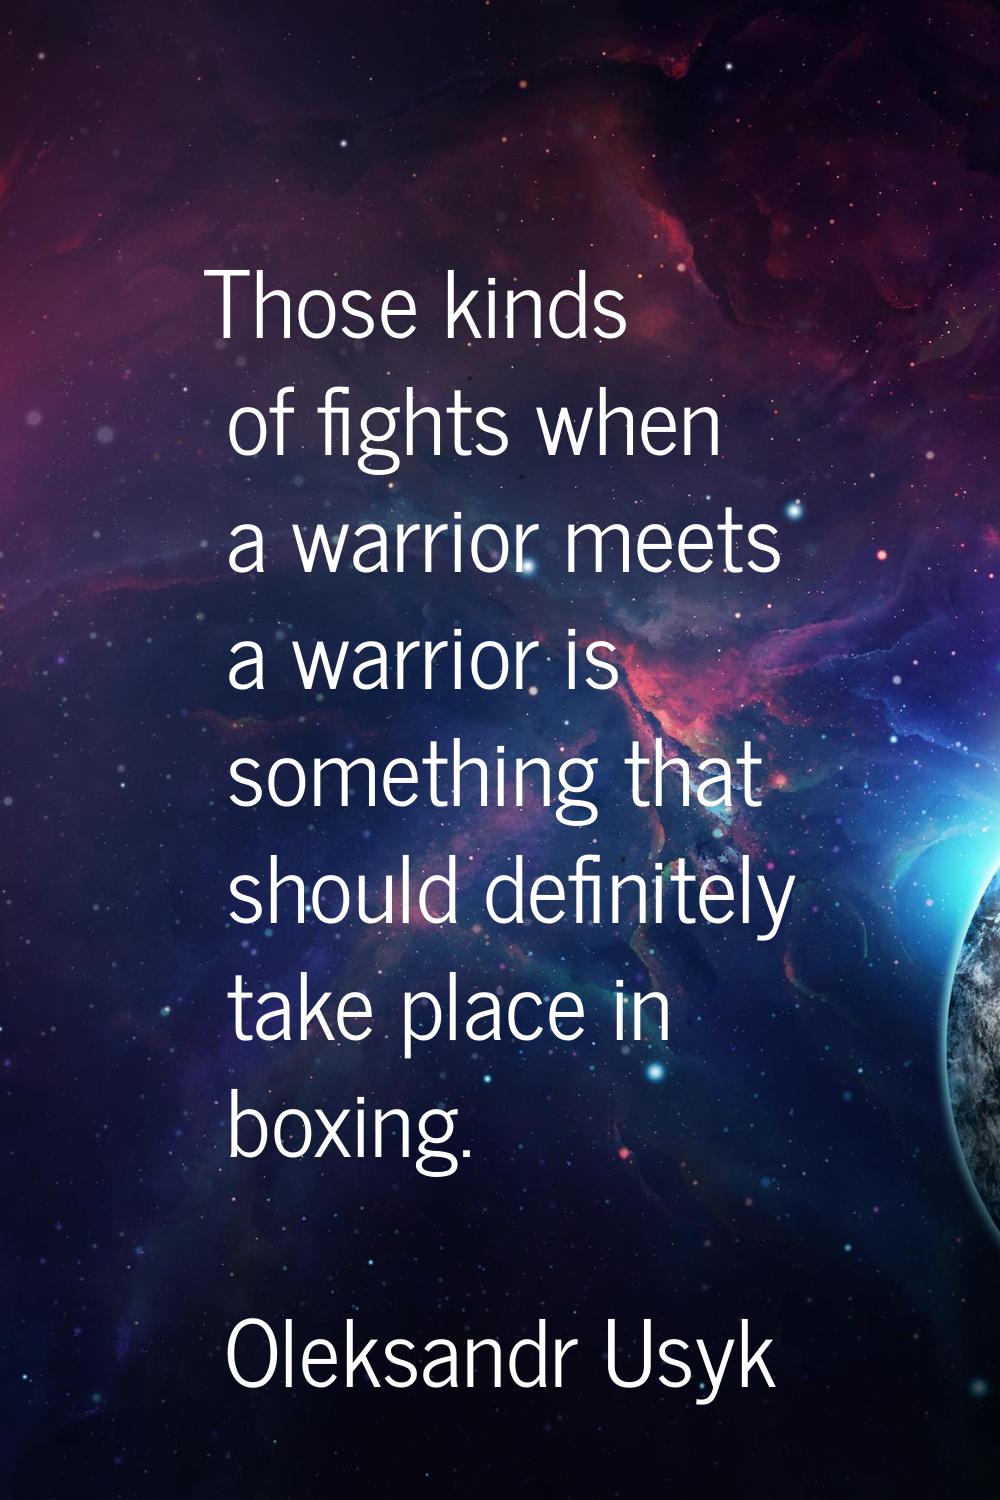 Those kinds of fights when a warrior meets a warrior is something that should definitely take place